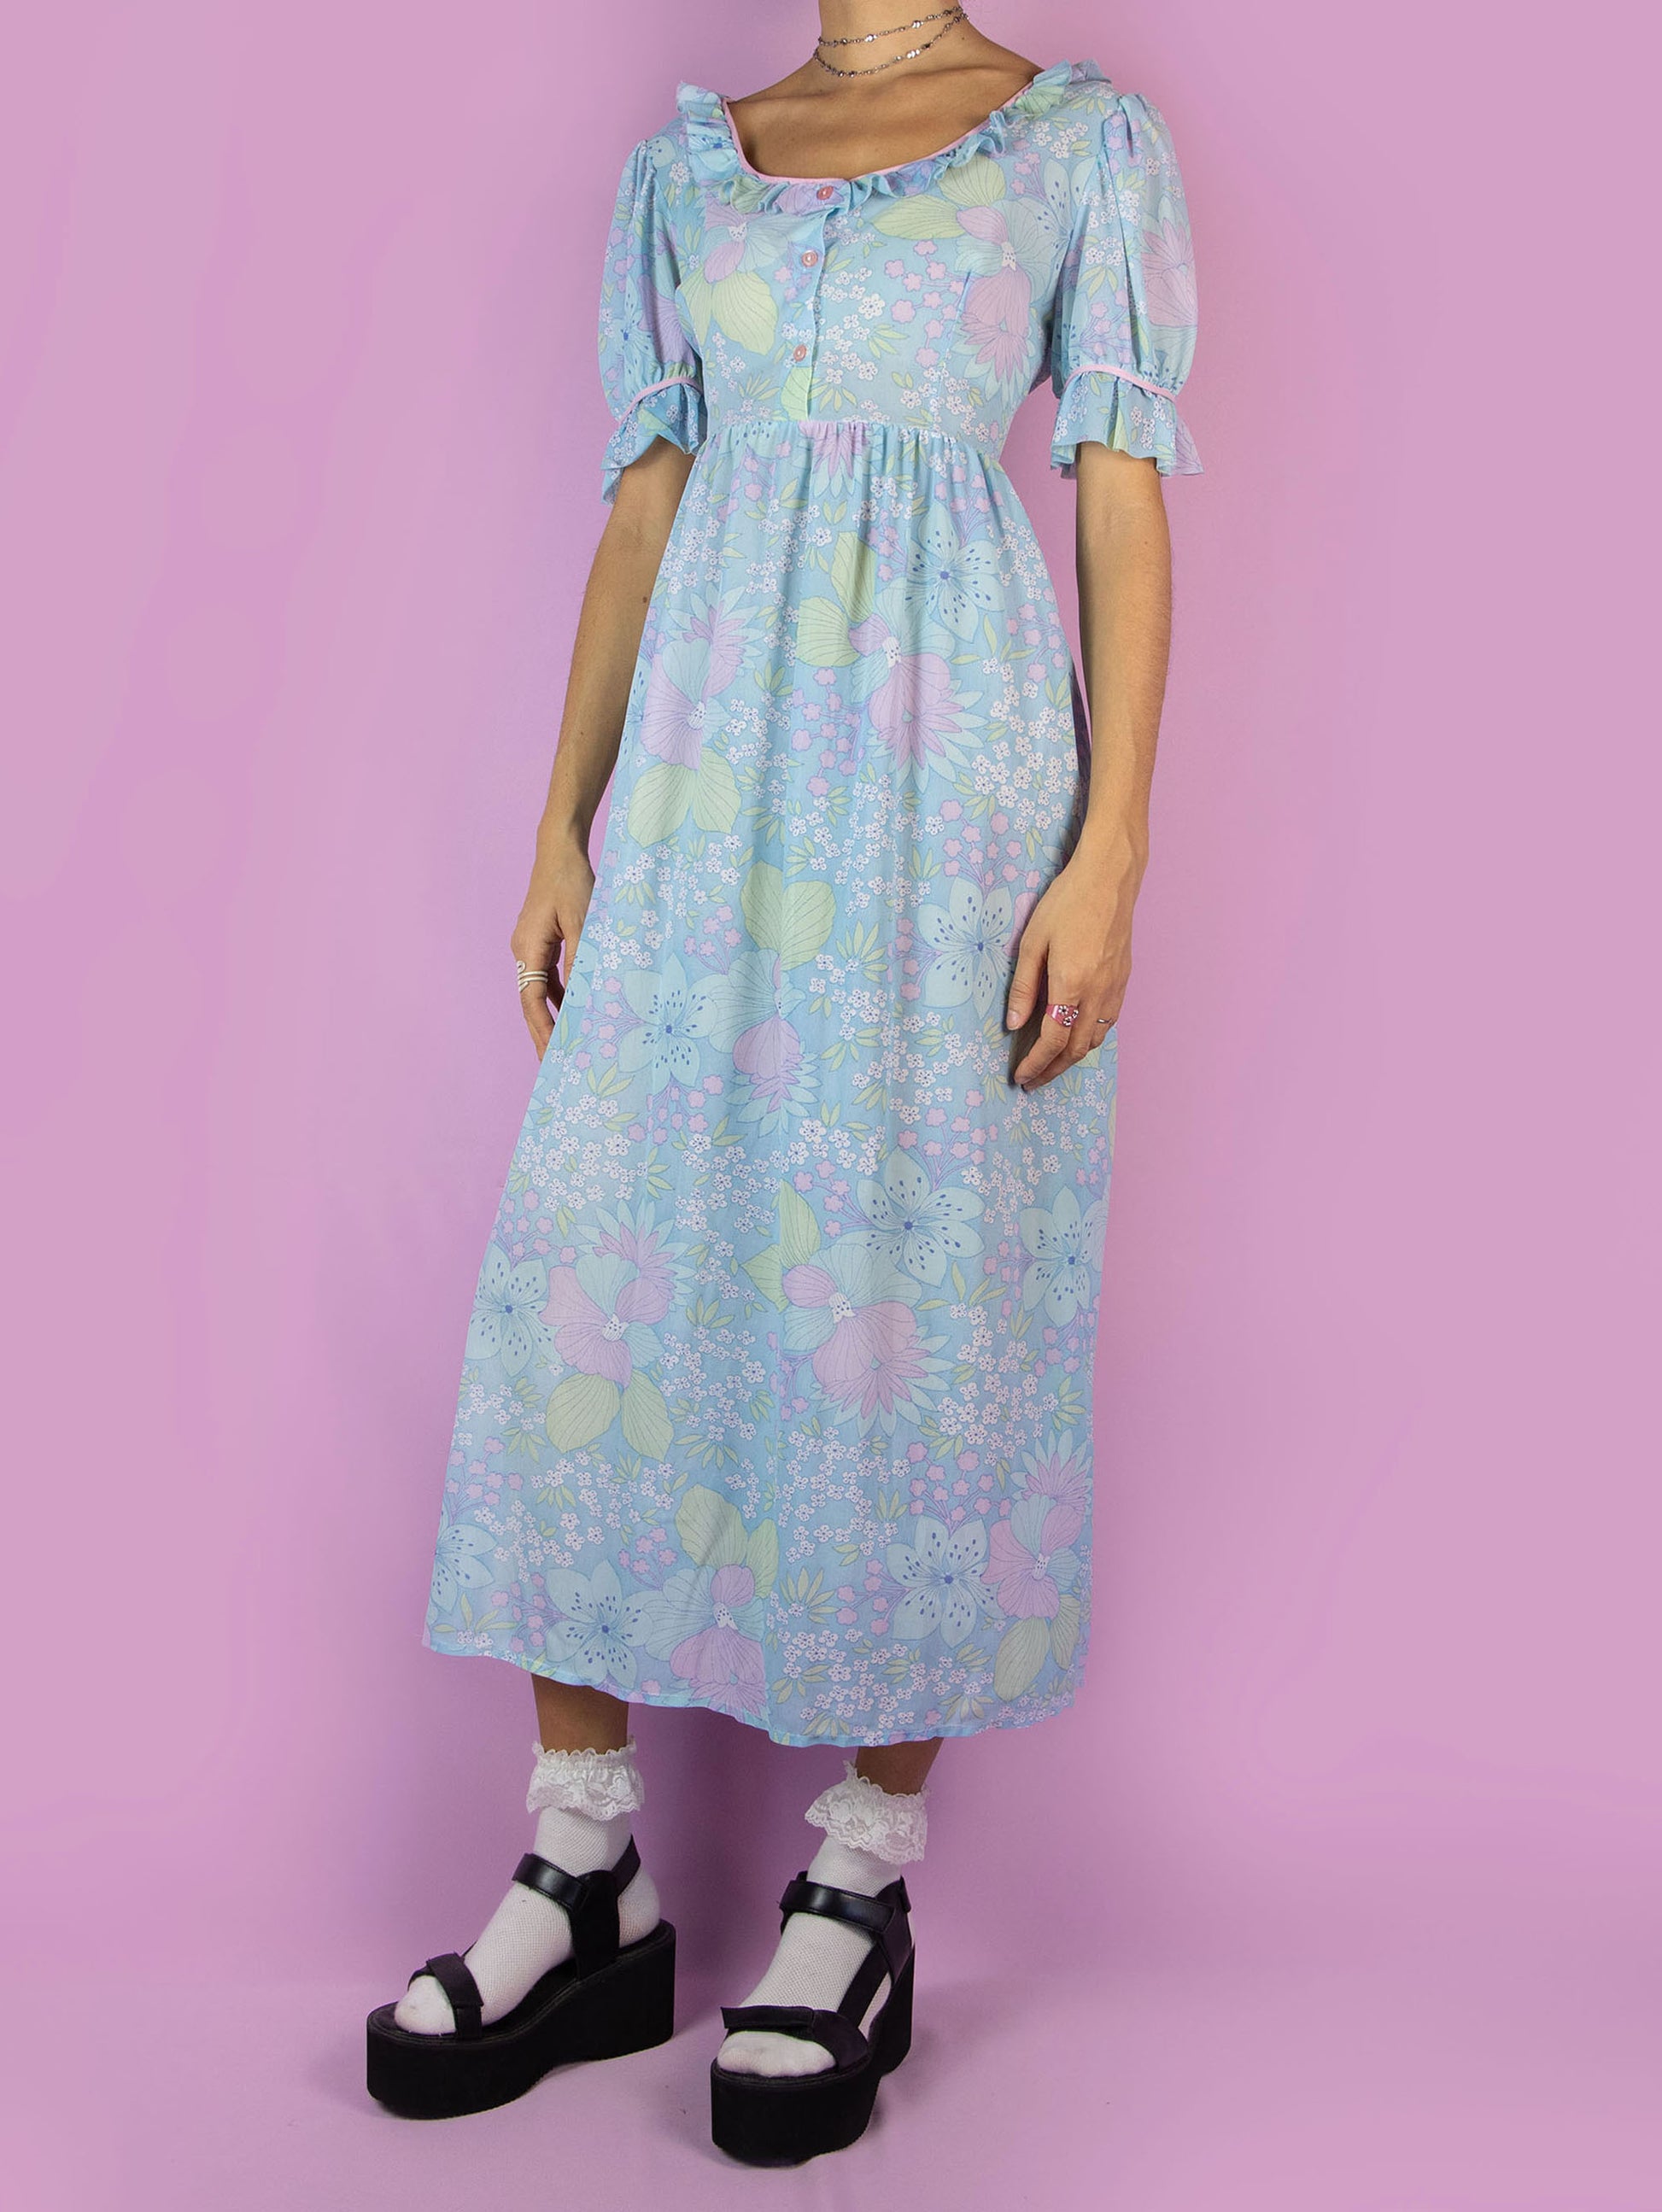 The Vintage 70s Floral Puff Sleeve Prairie Dress is a blue semi-sheer maxi dress in a multicolored floral pattern with short puff sleeves, ruffles, and buttons at the front. Country western inspired 1970s boho midi dress.